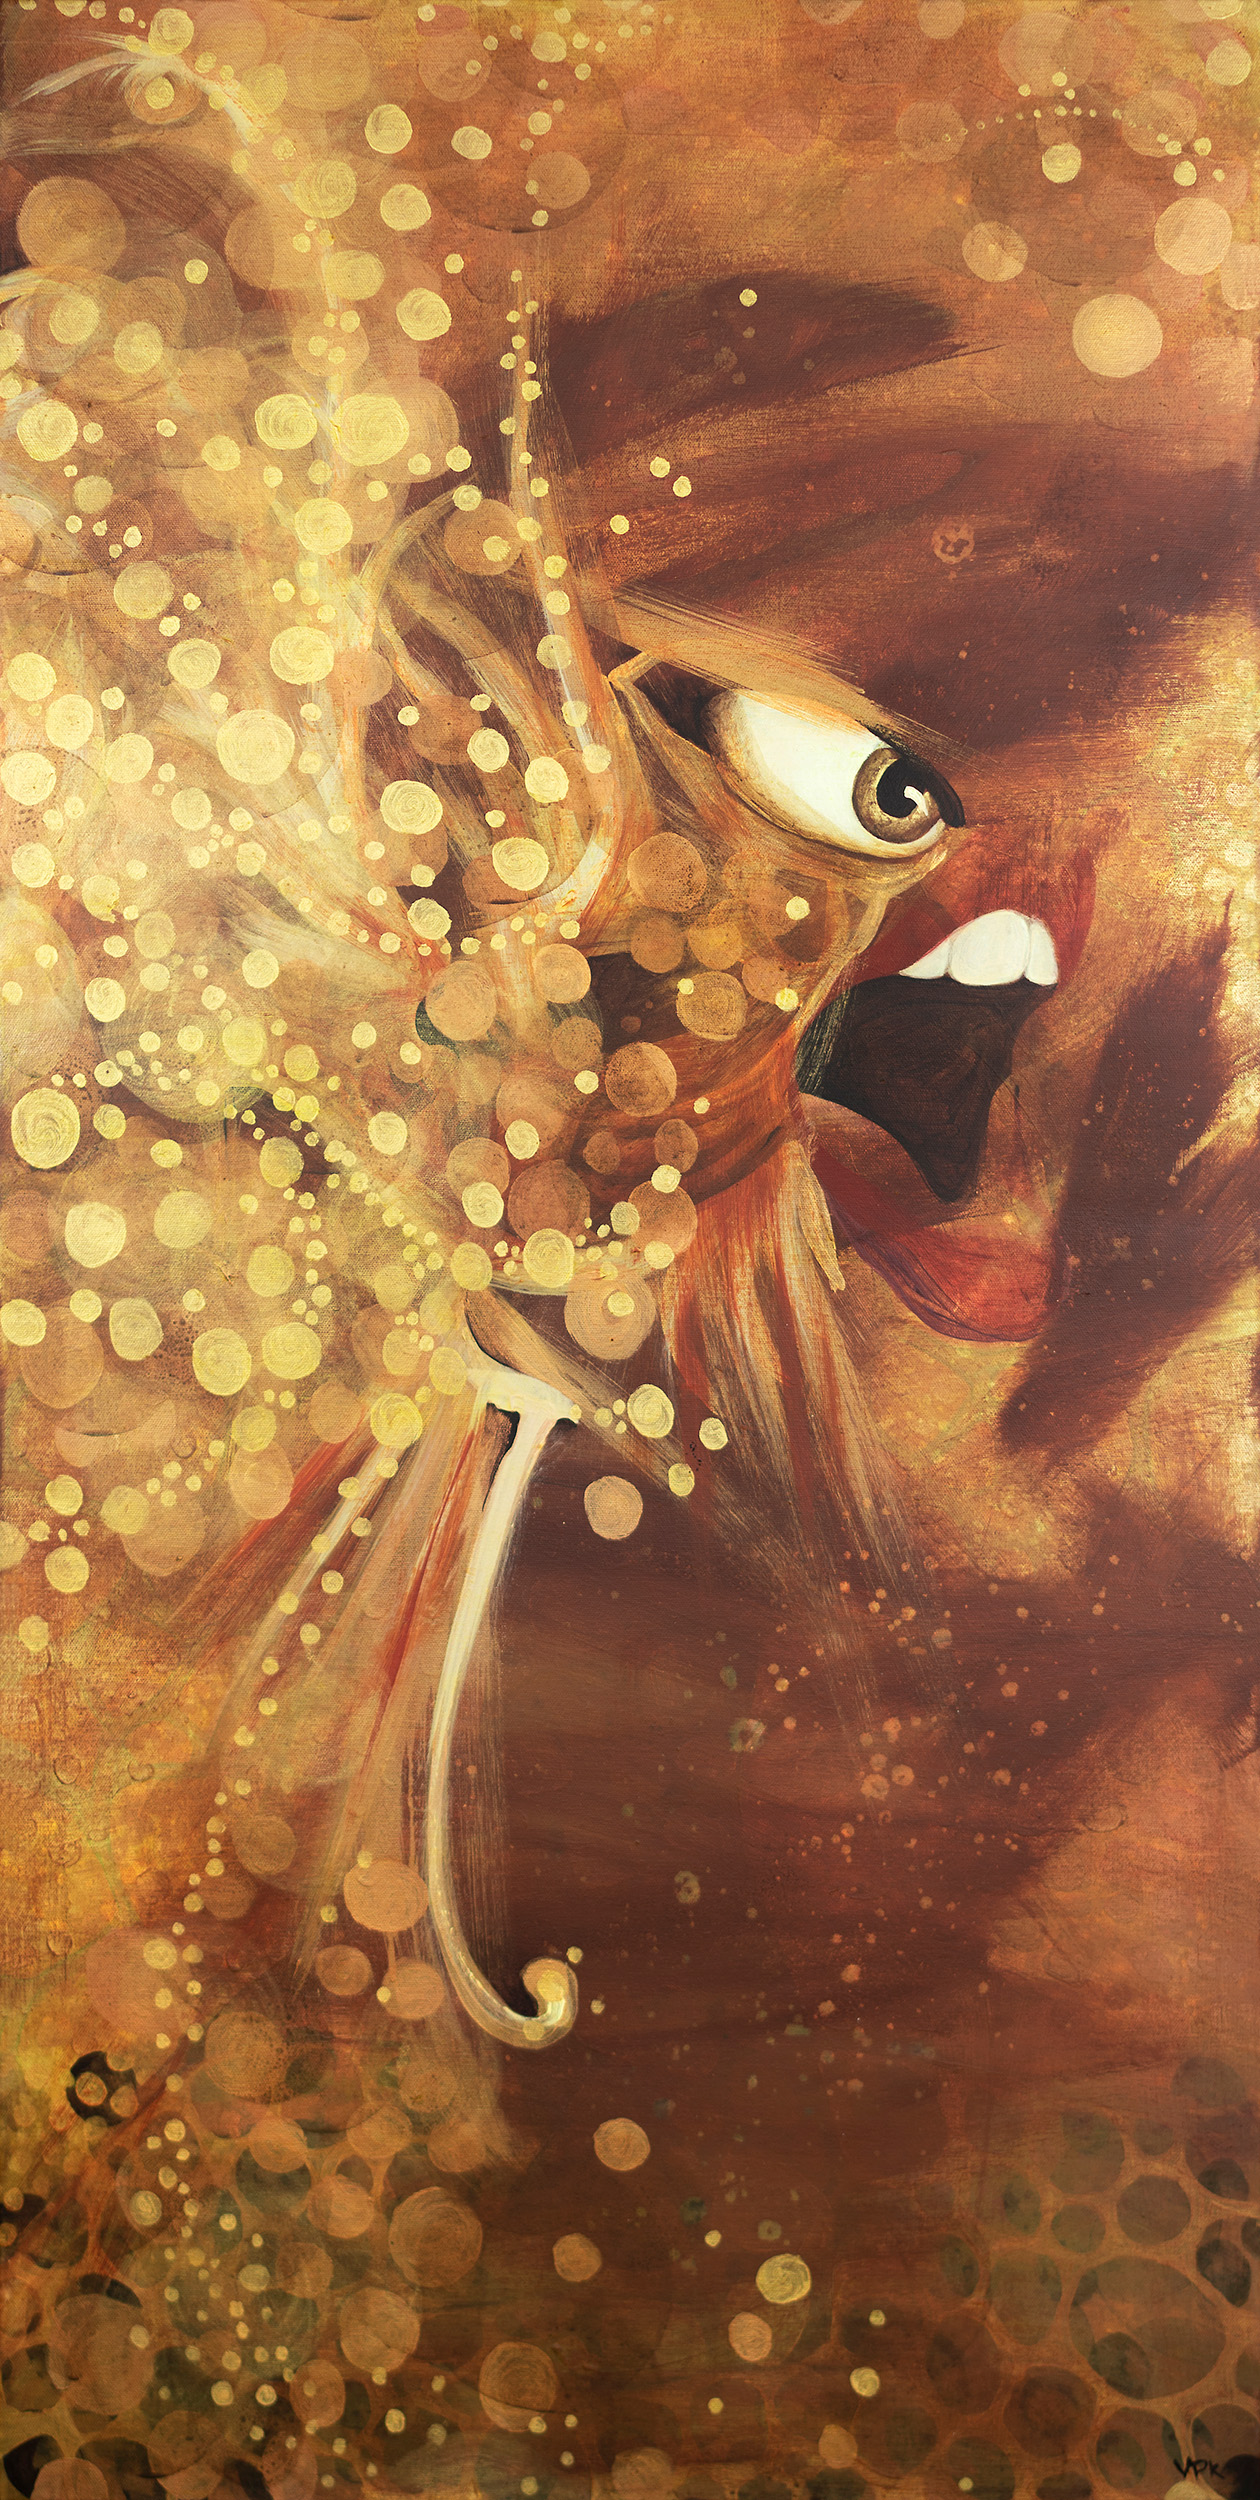 Painting of a phoenix bird with mouth and eye, surrounded by golden and white bubbles, on brown background.